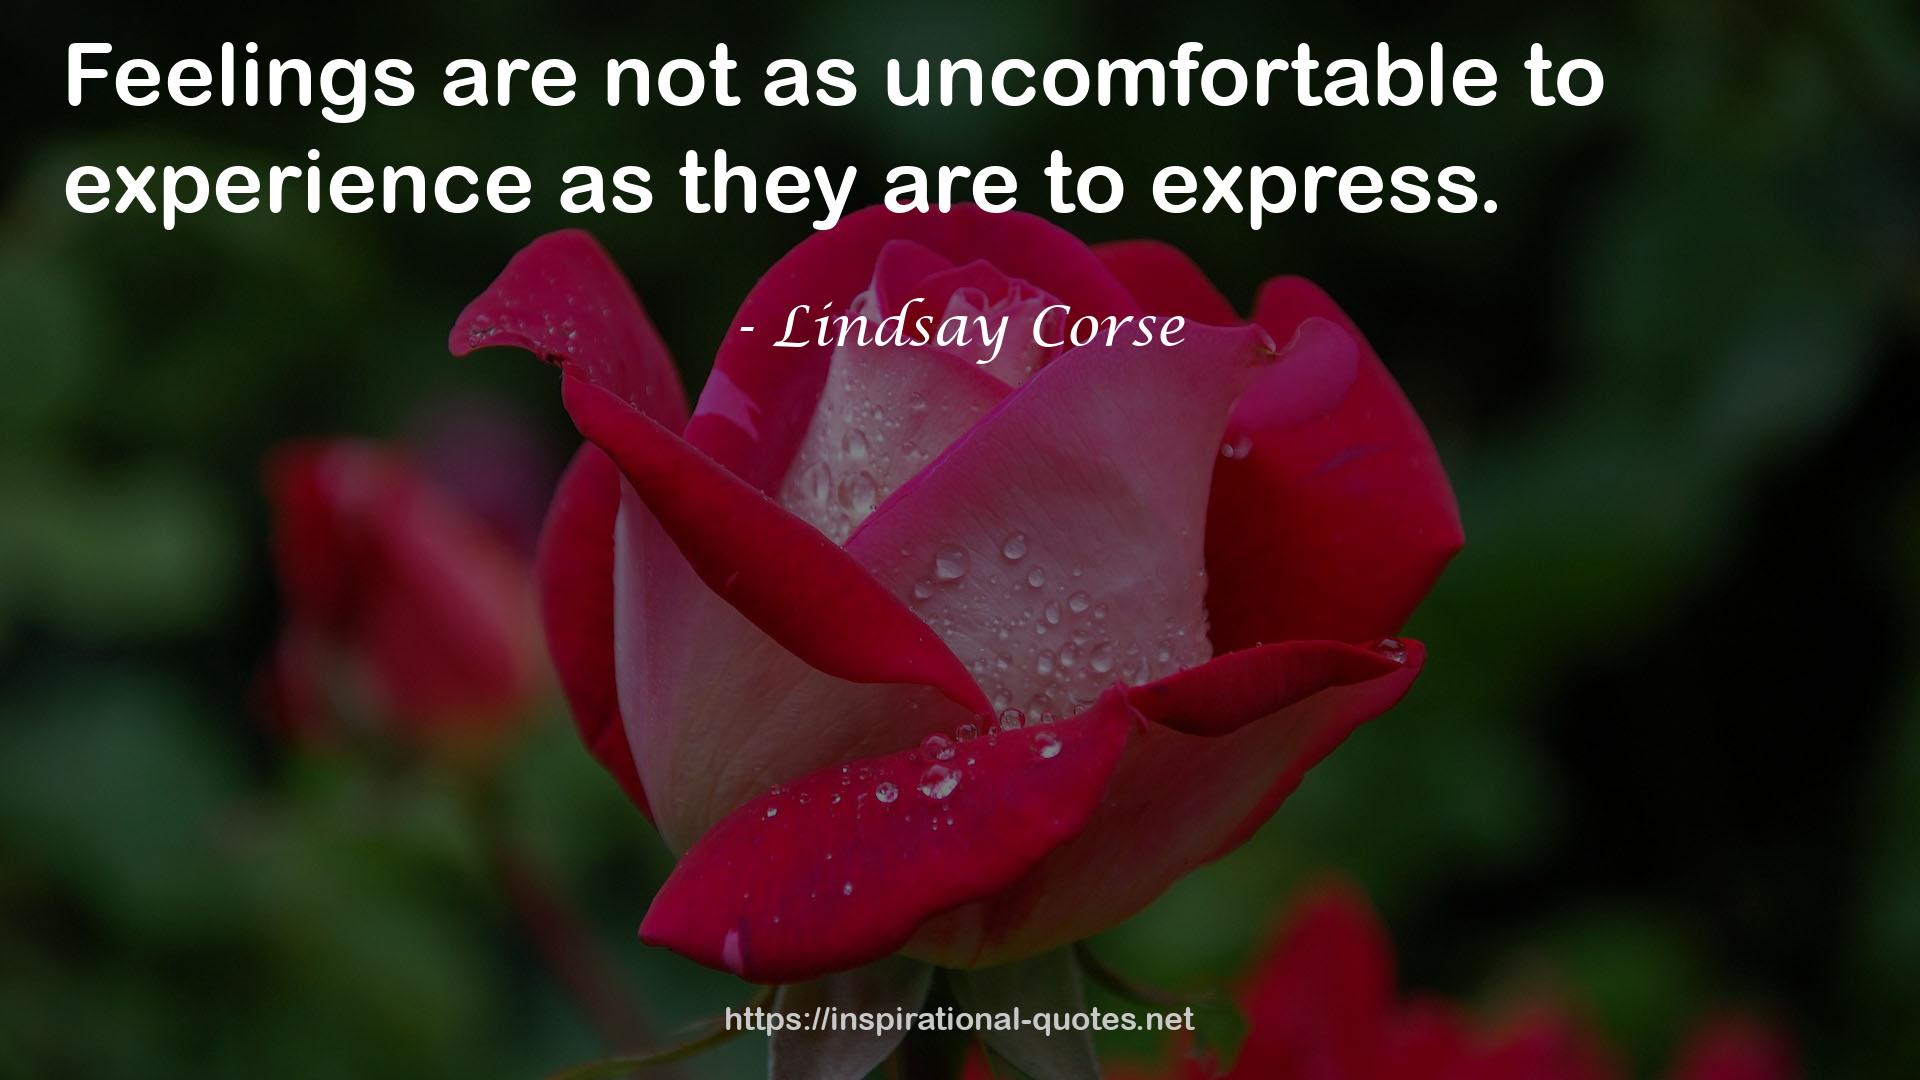 Lindsay Corse QUOTES